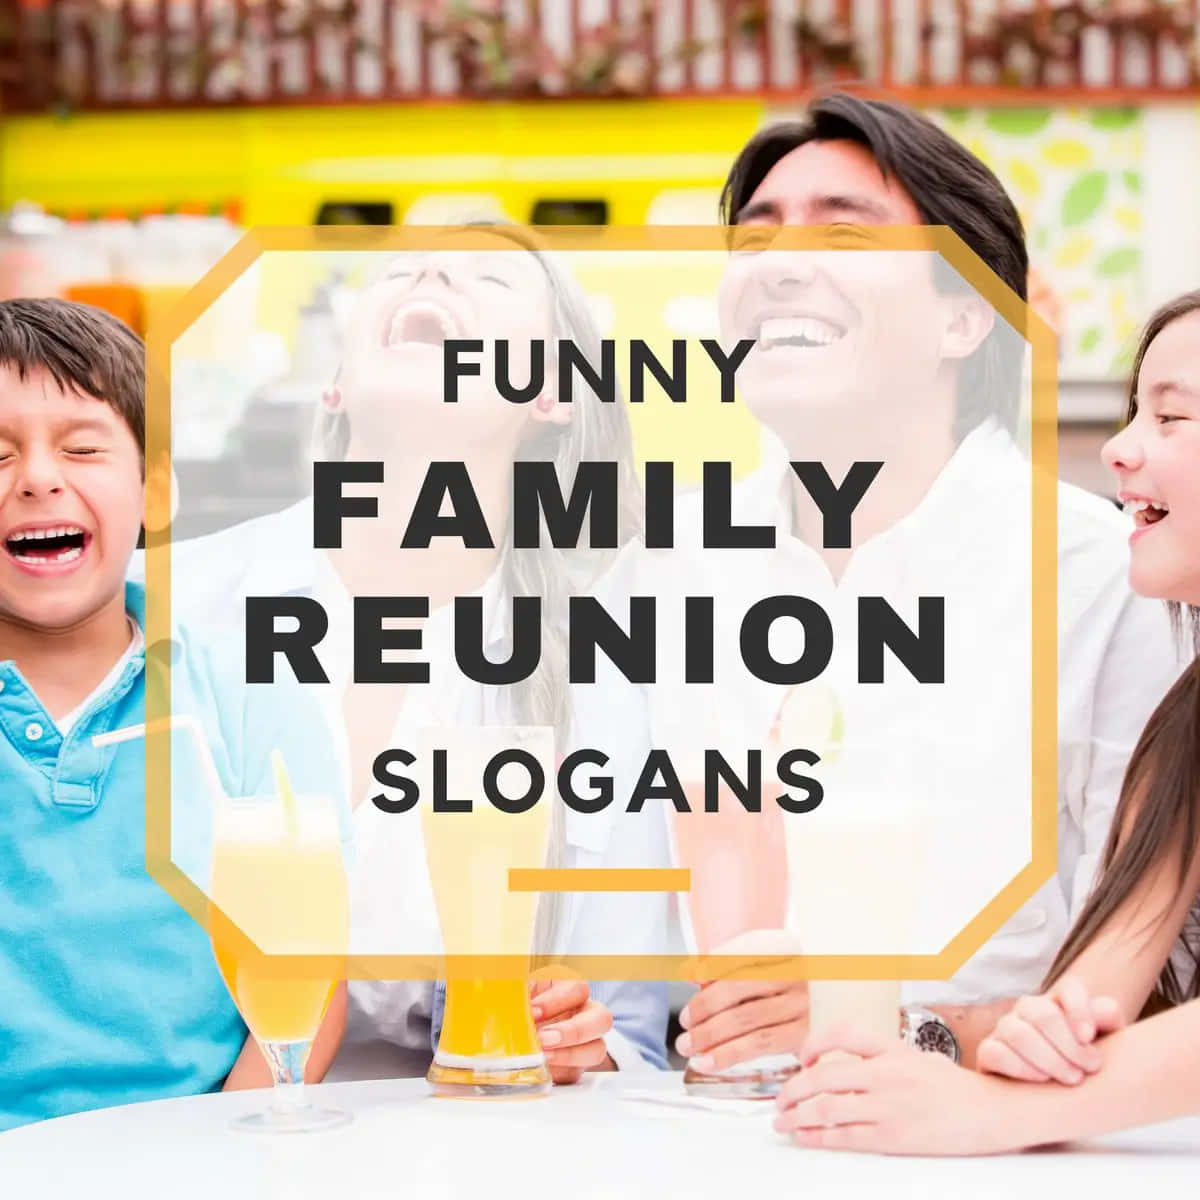 Funny Family Reunion Slogan Picture